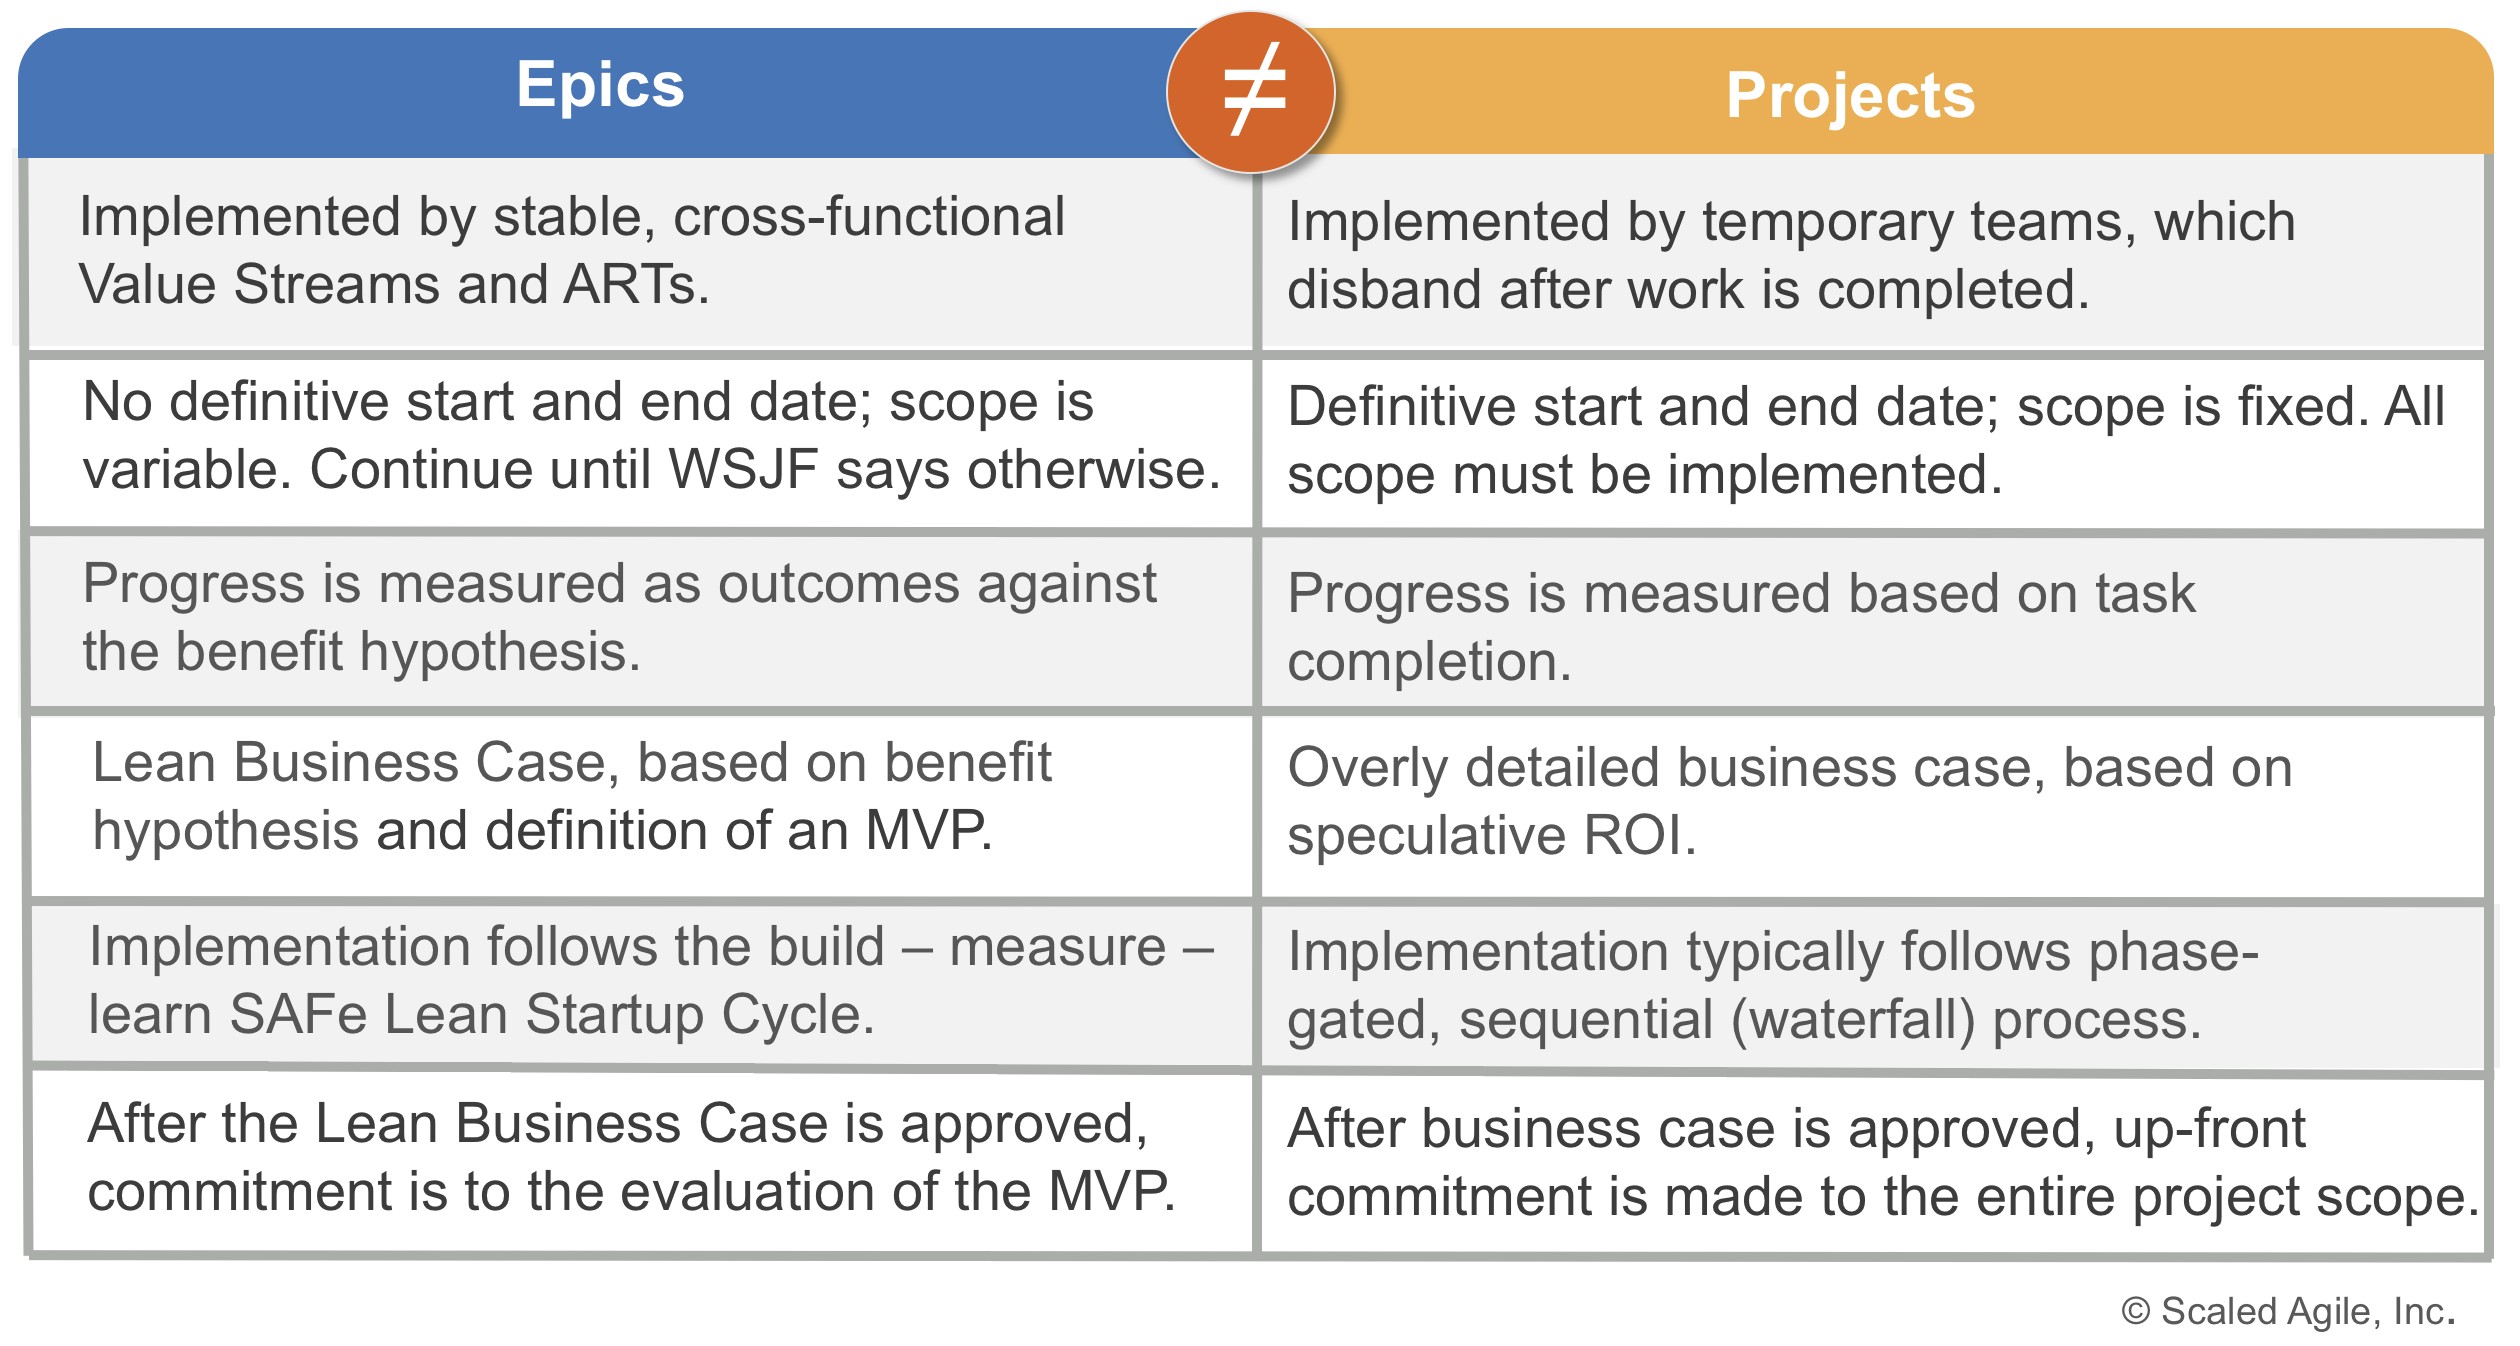 epic hypothesis statement scaled agile